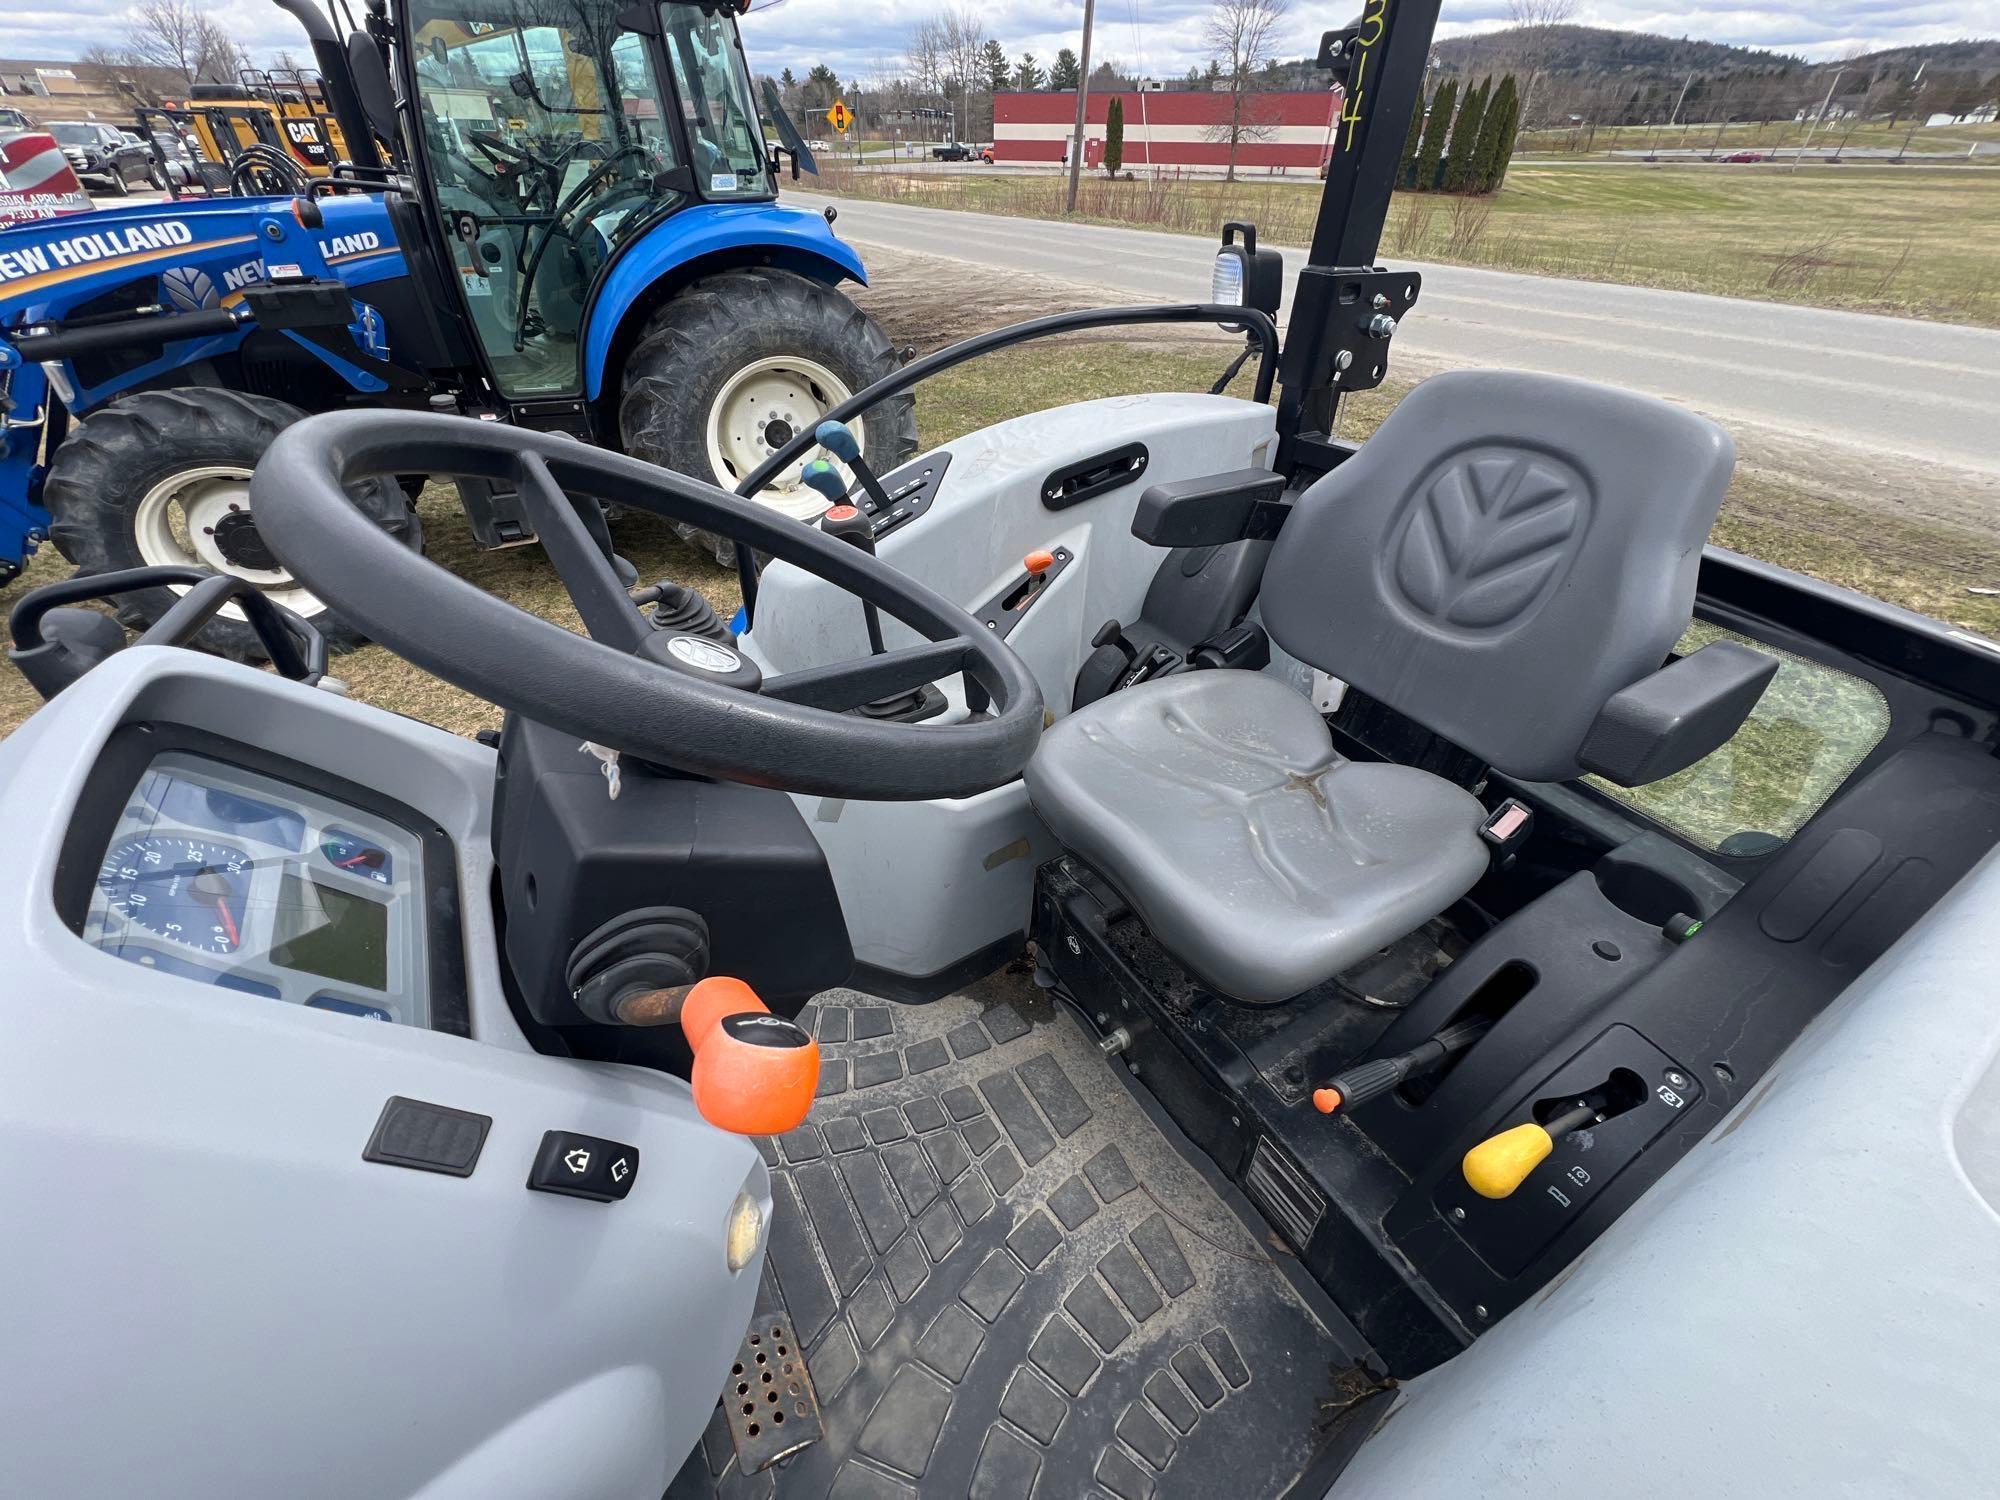 NEW NEW HOLLAND WORKMASTER 75 TRACTOR LOADER 4x4, powered by diesel engine, 75hp, equipped with